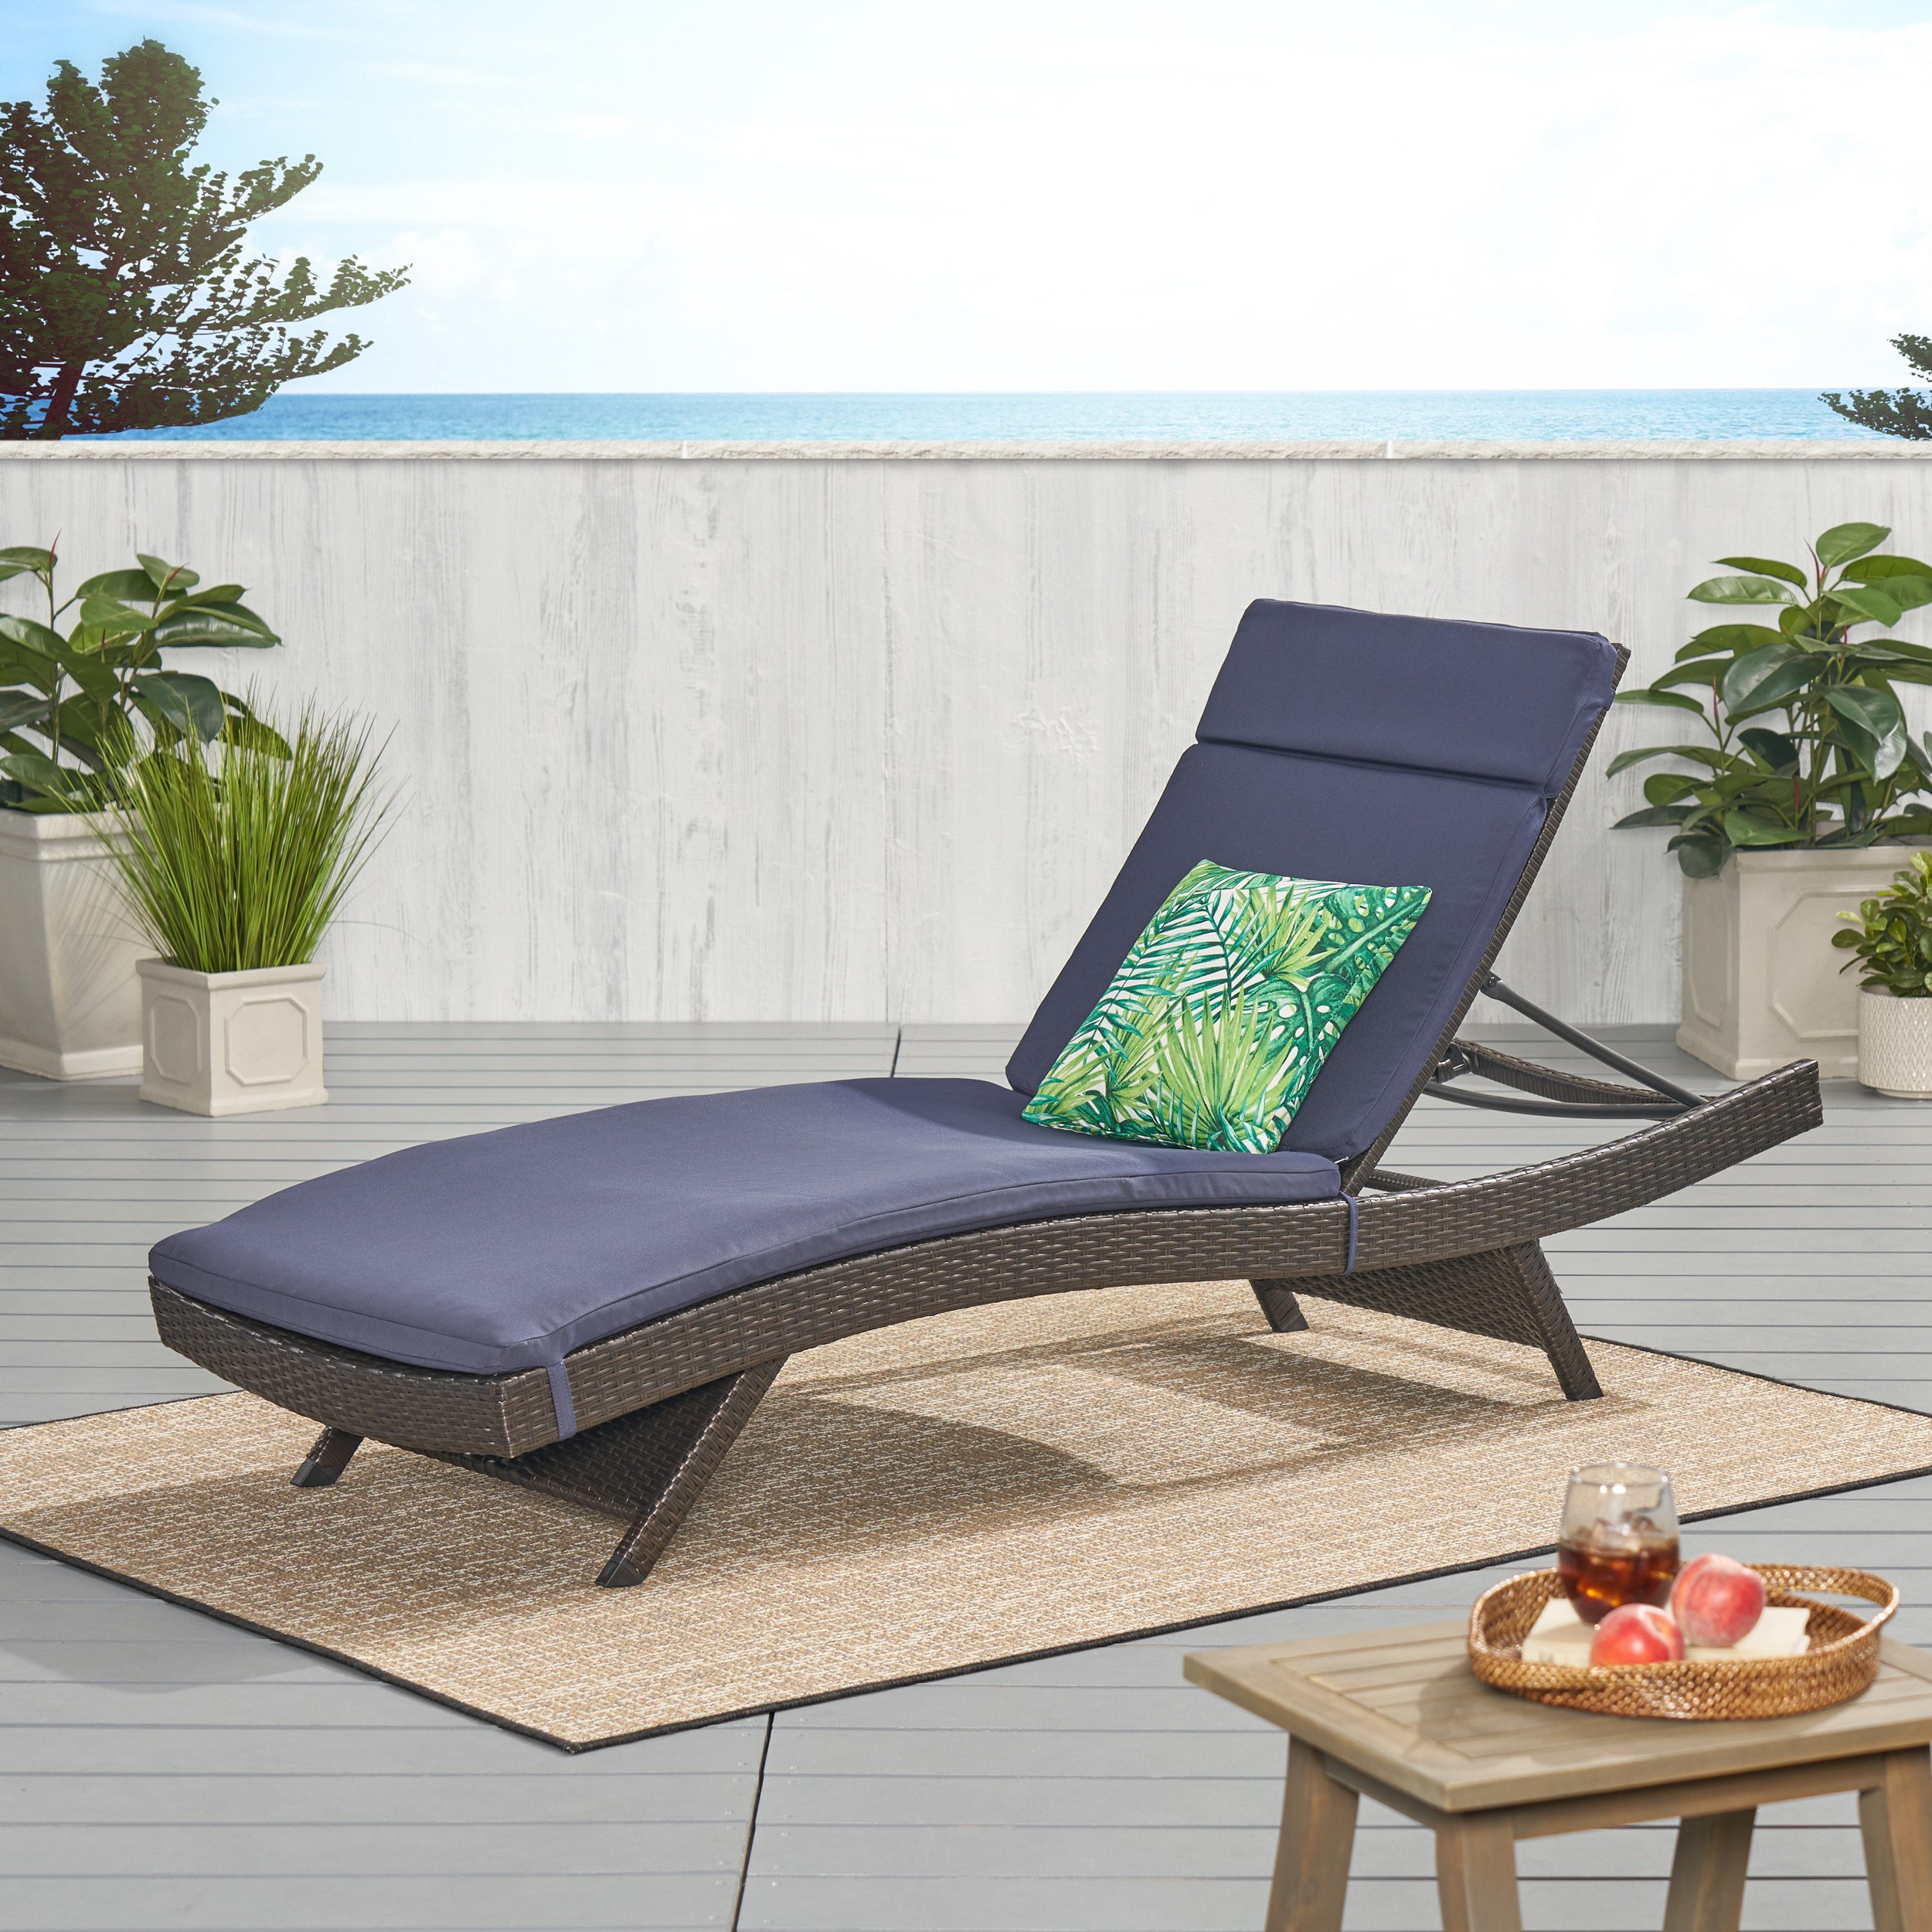 Lakeport Outdoor Adjustable Chaise Lounge Chair With Cushion - Green Cushion